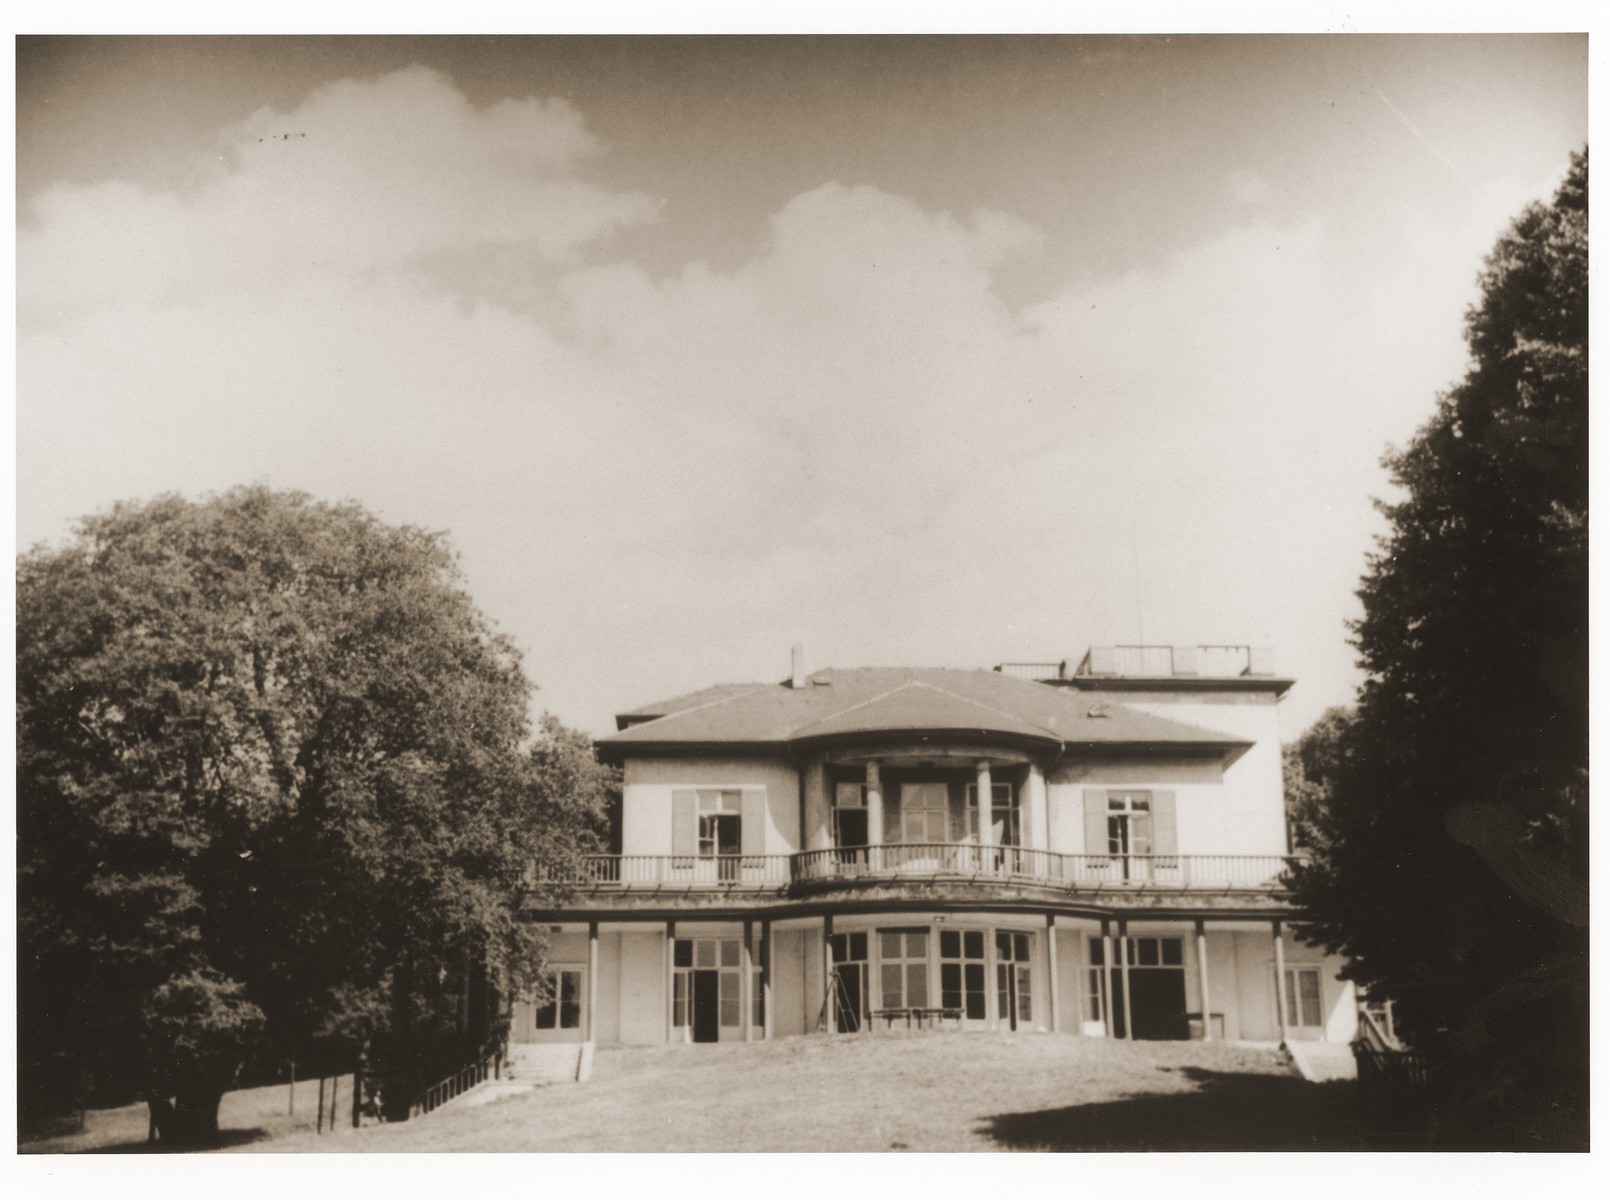 View of the JDC children's home on the Warburg estate in Blankenese.